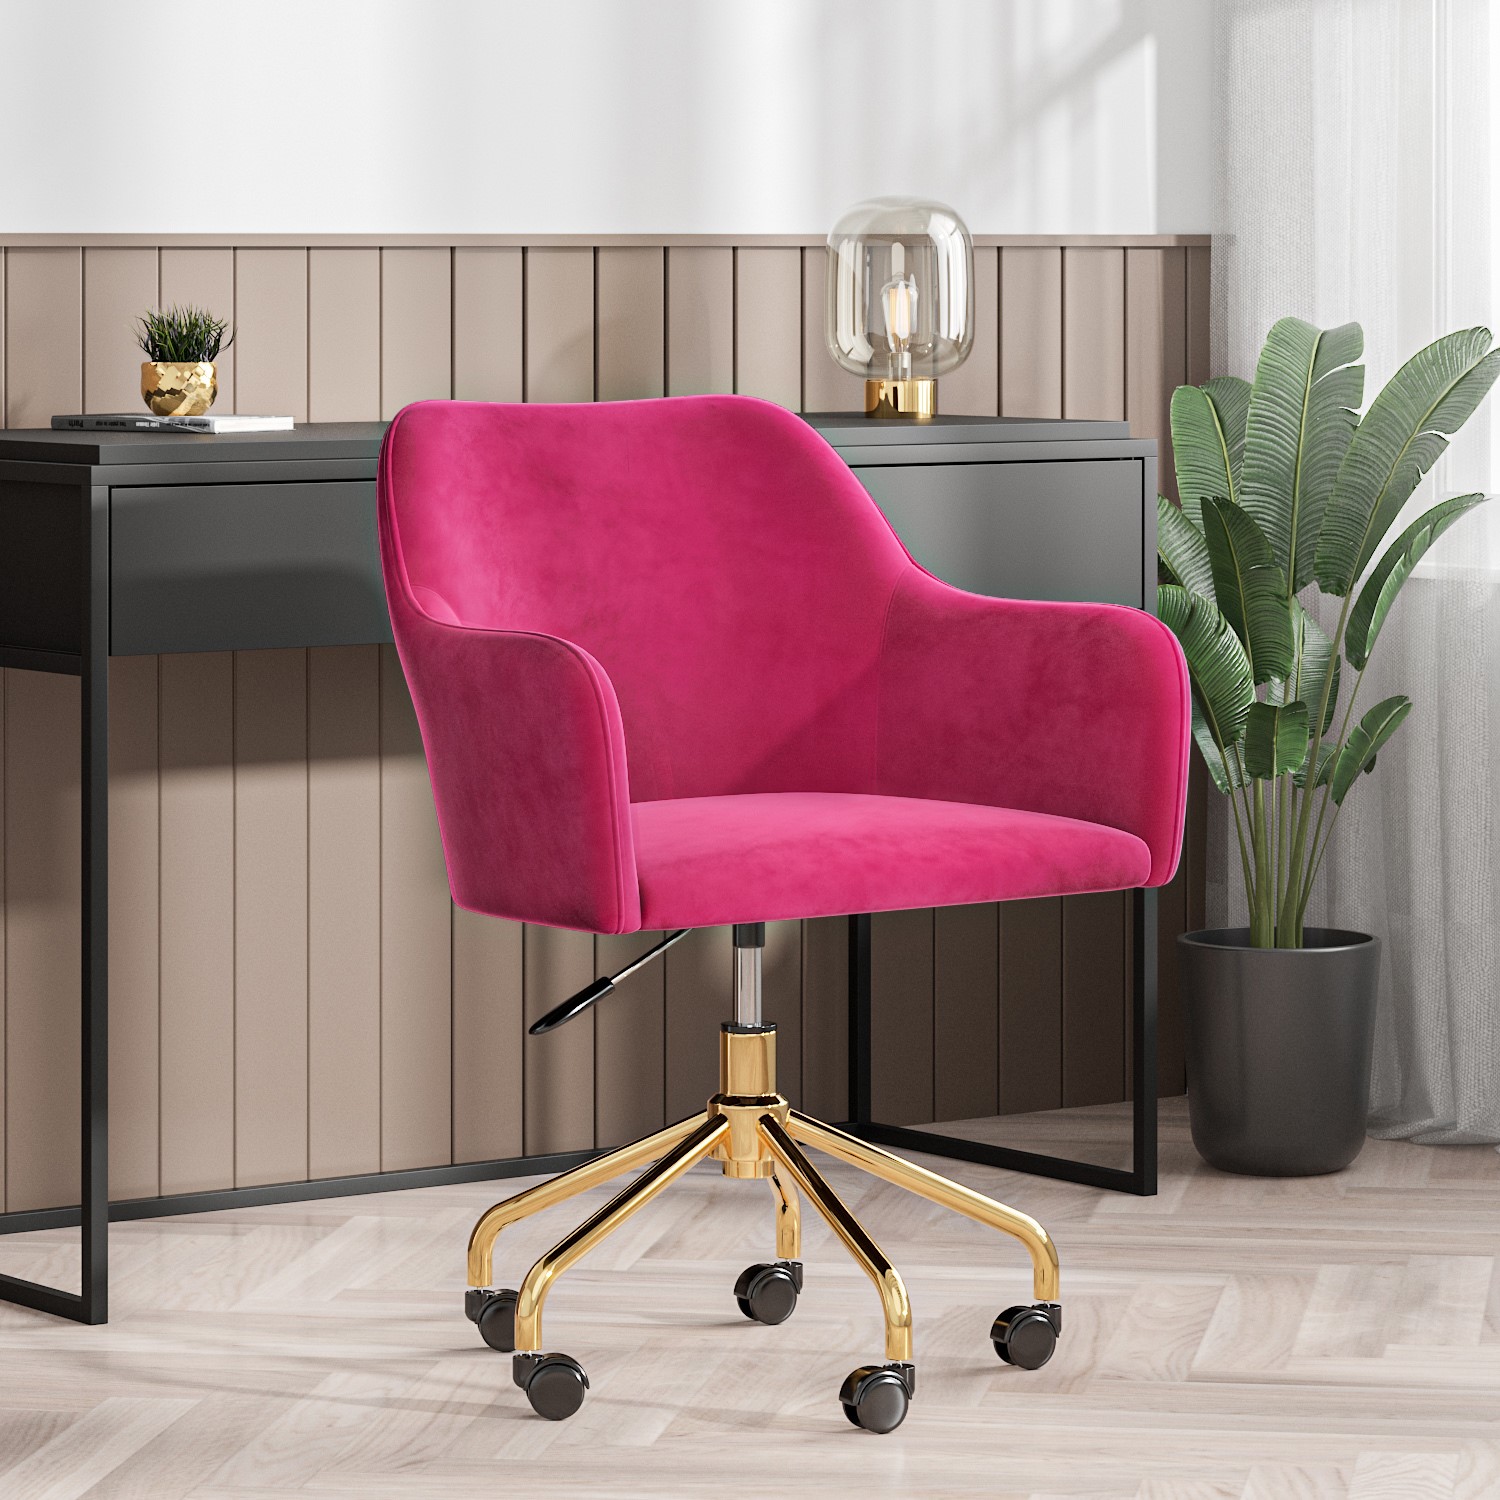 Hot Pink Velvet Office Chair with Gold Base - Marley - Furniture123